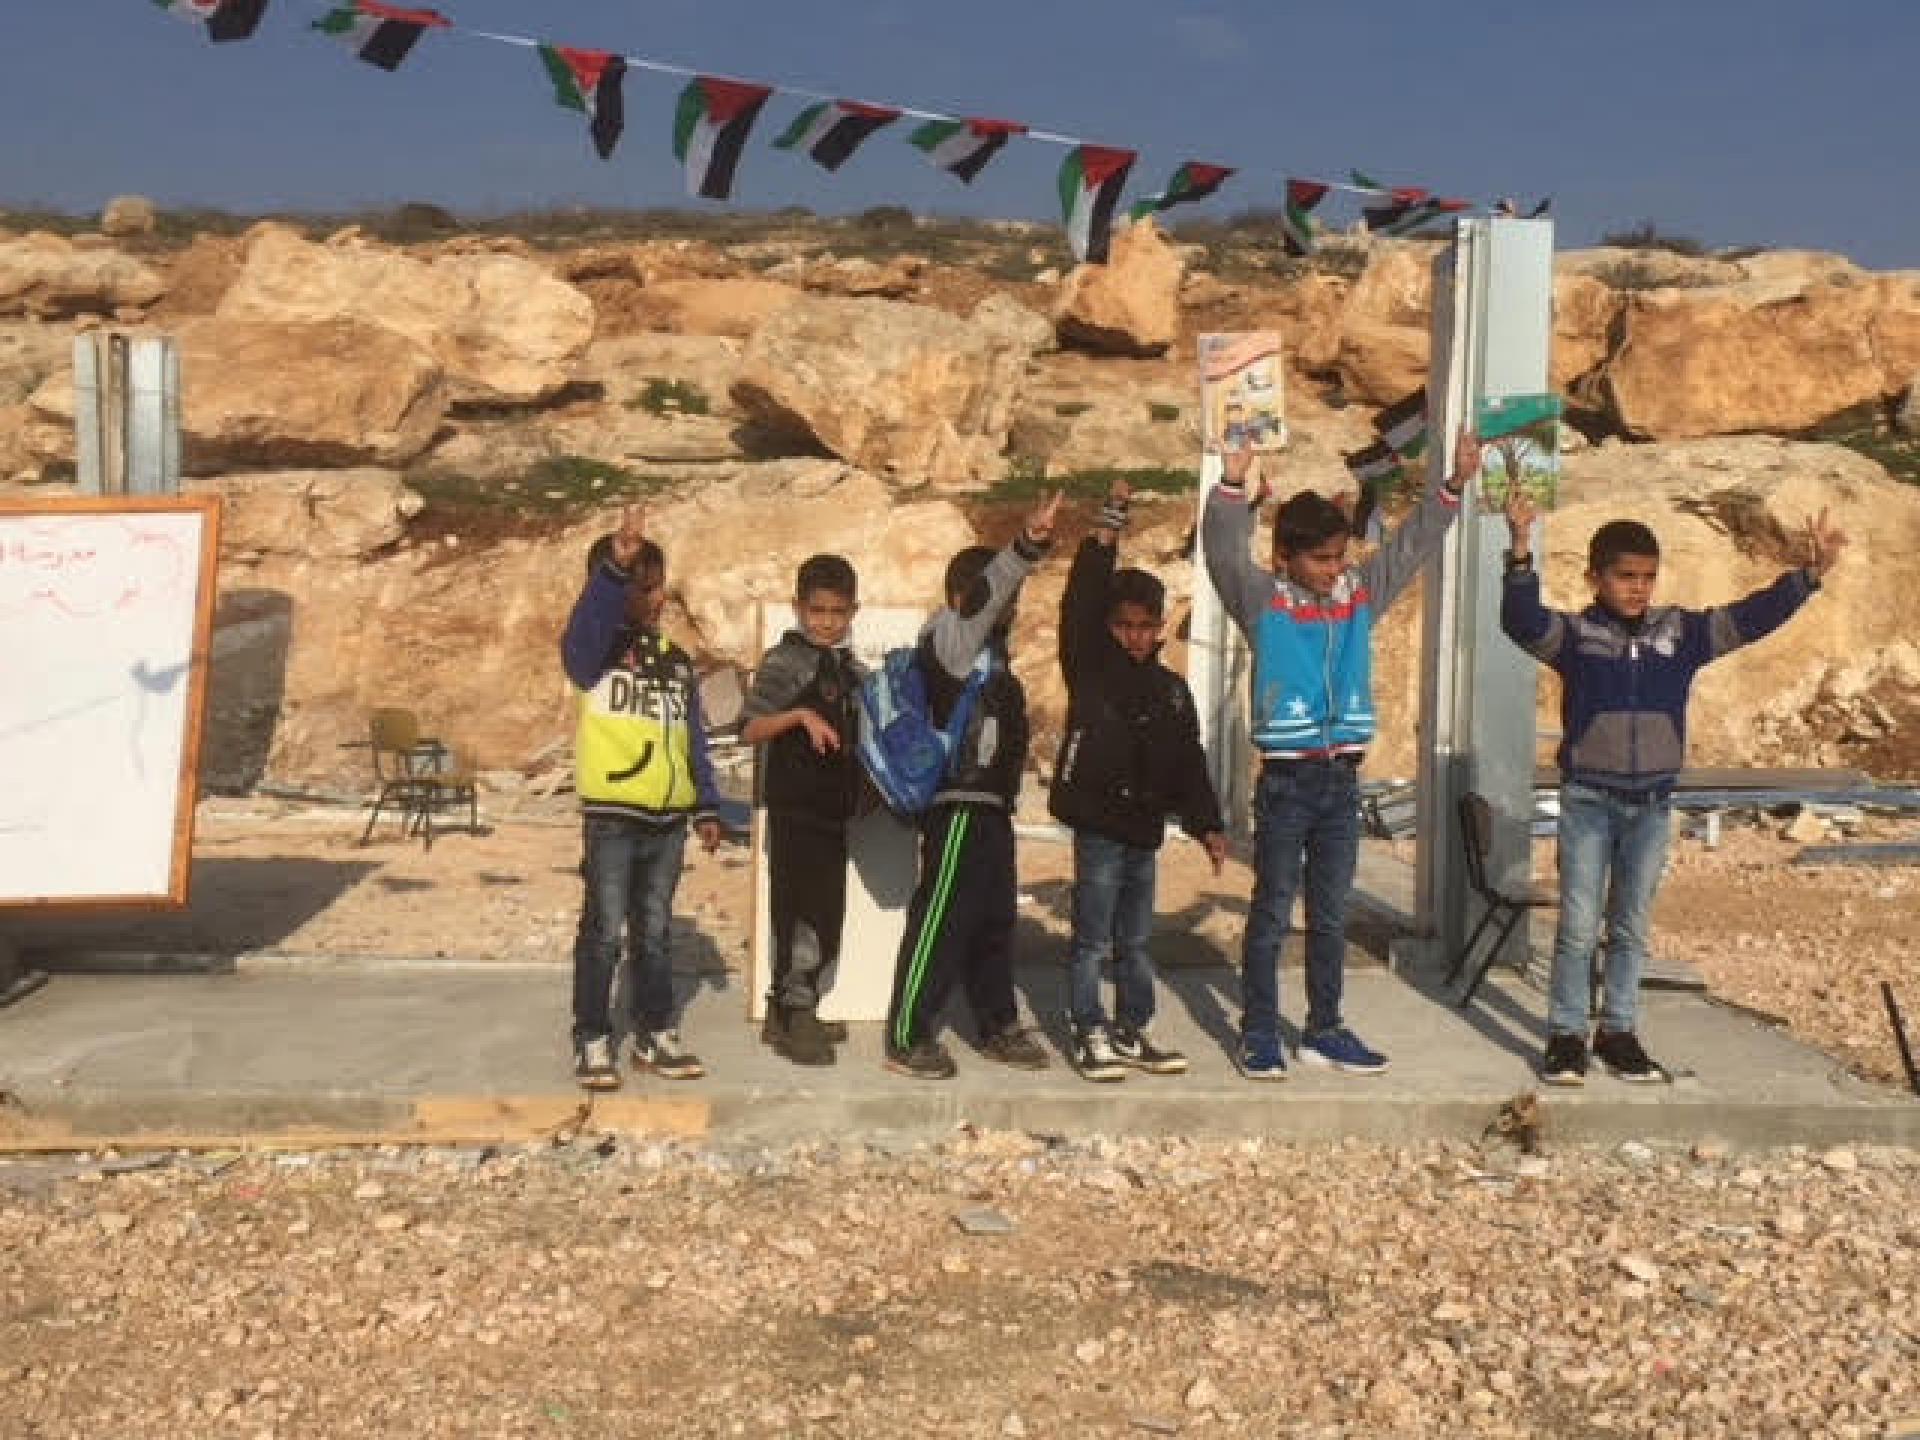 "Sumud" after the demolition of the school in Simia